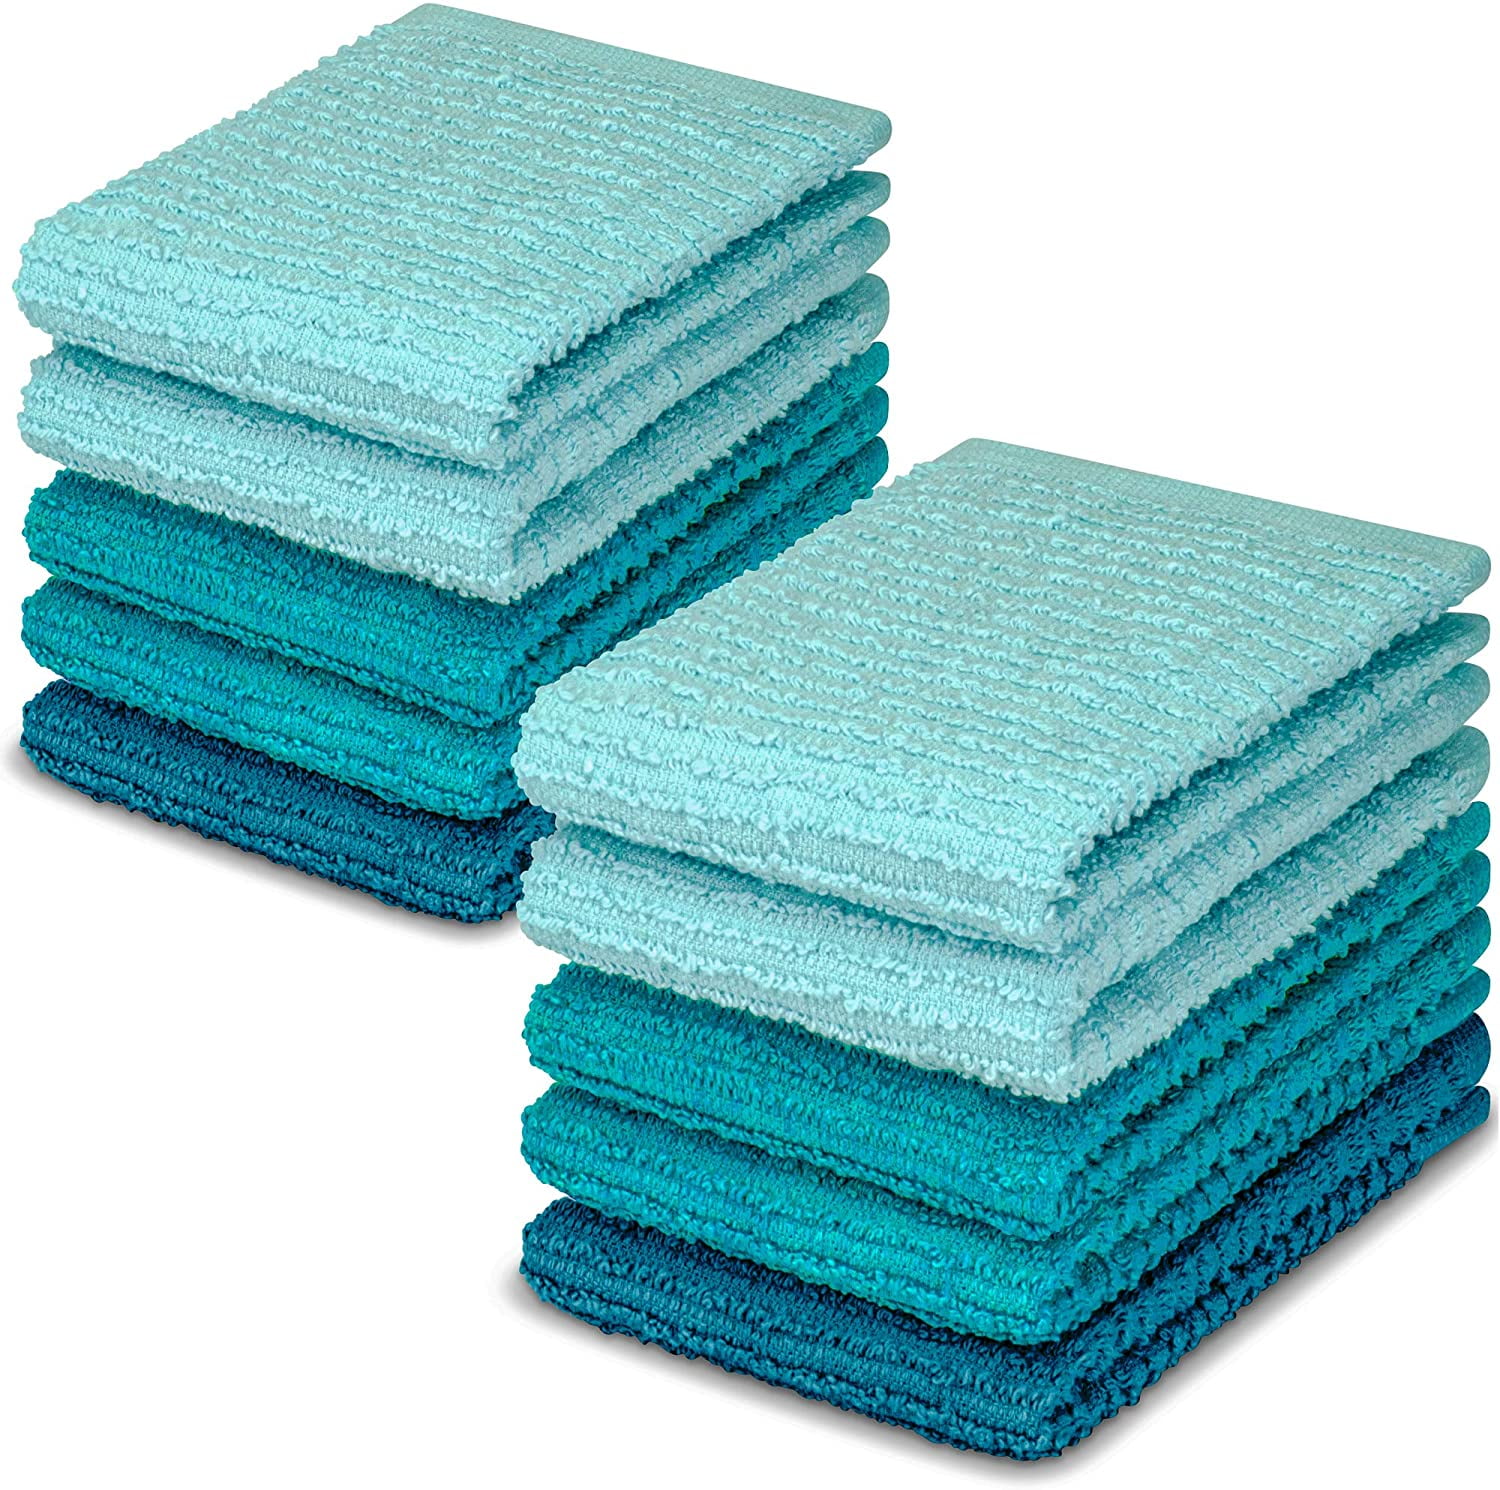 Details about   5 PC MICRO FIBER 11” X 11” SIZE MULTIPURPOSE CLEANING TOWELS 5 COLORS 